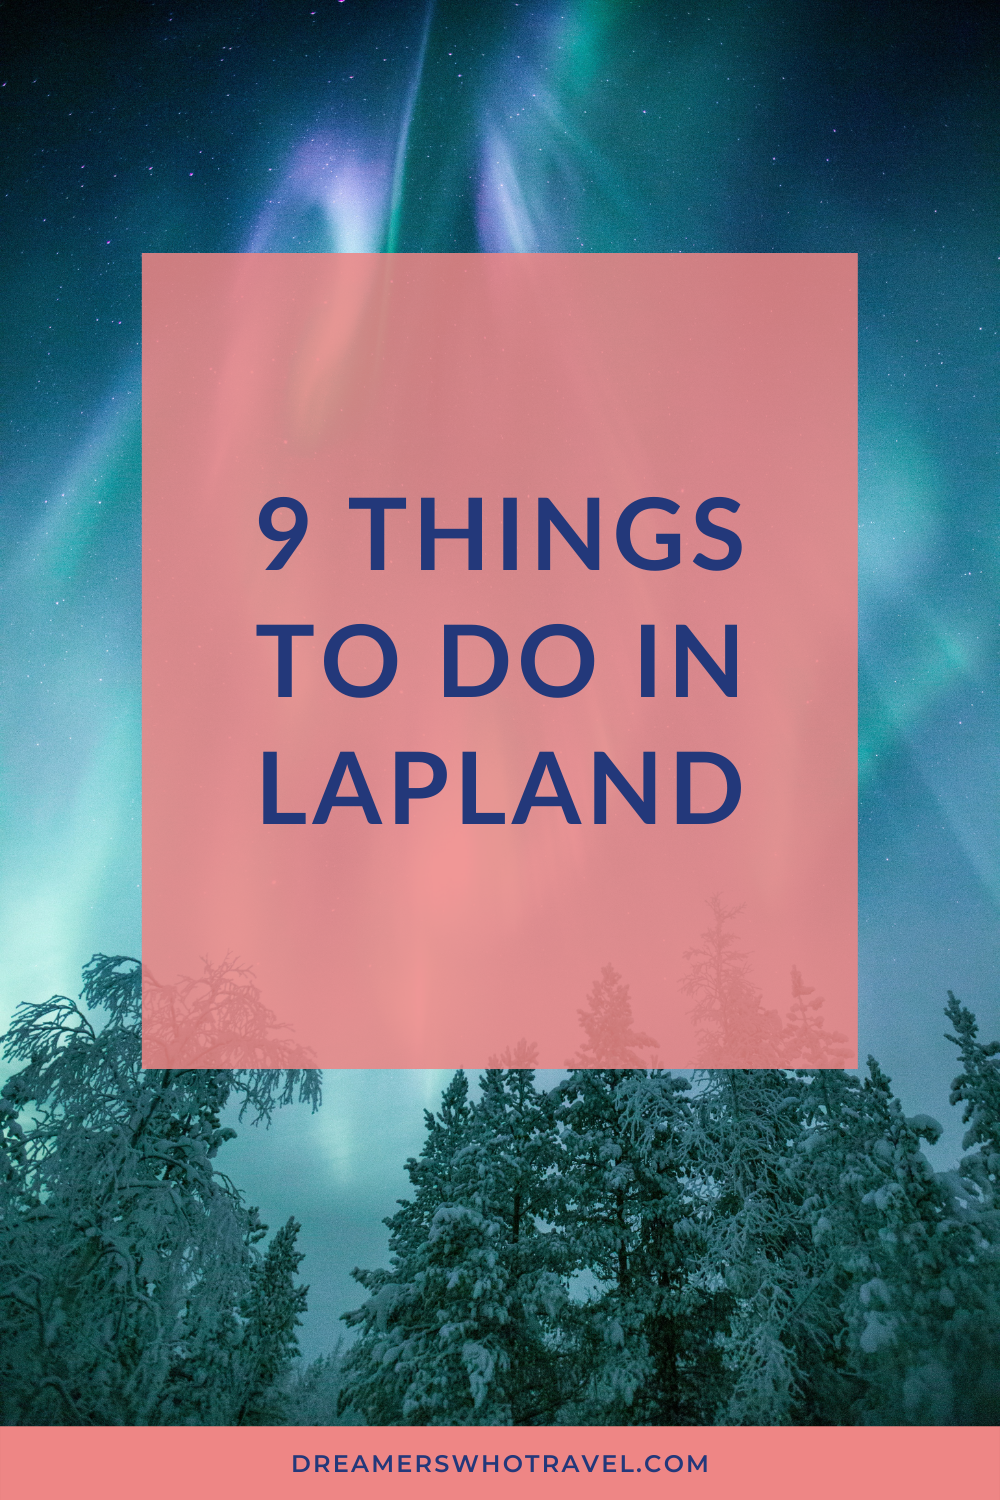 9 Things to do in Lapland, Finland